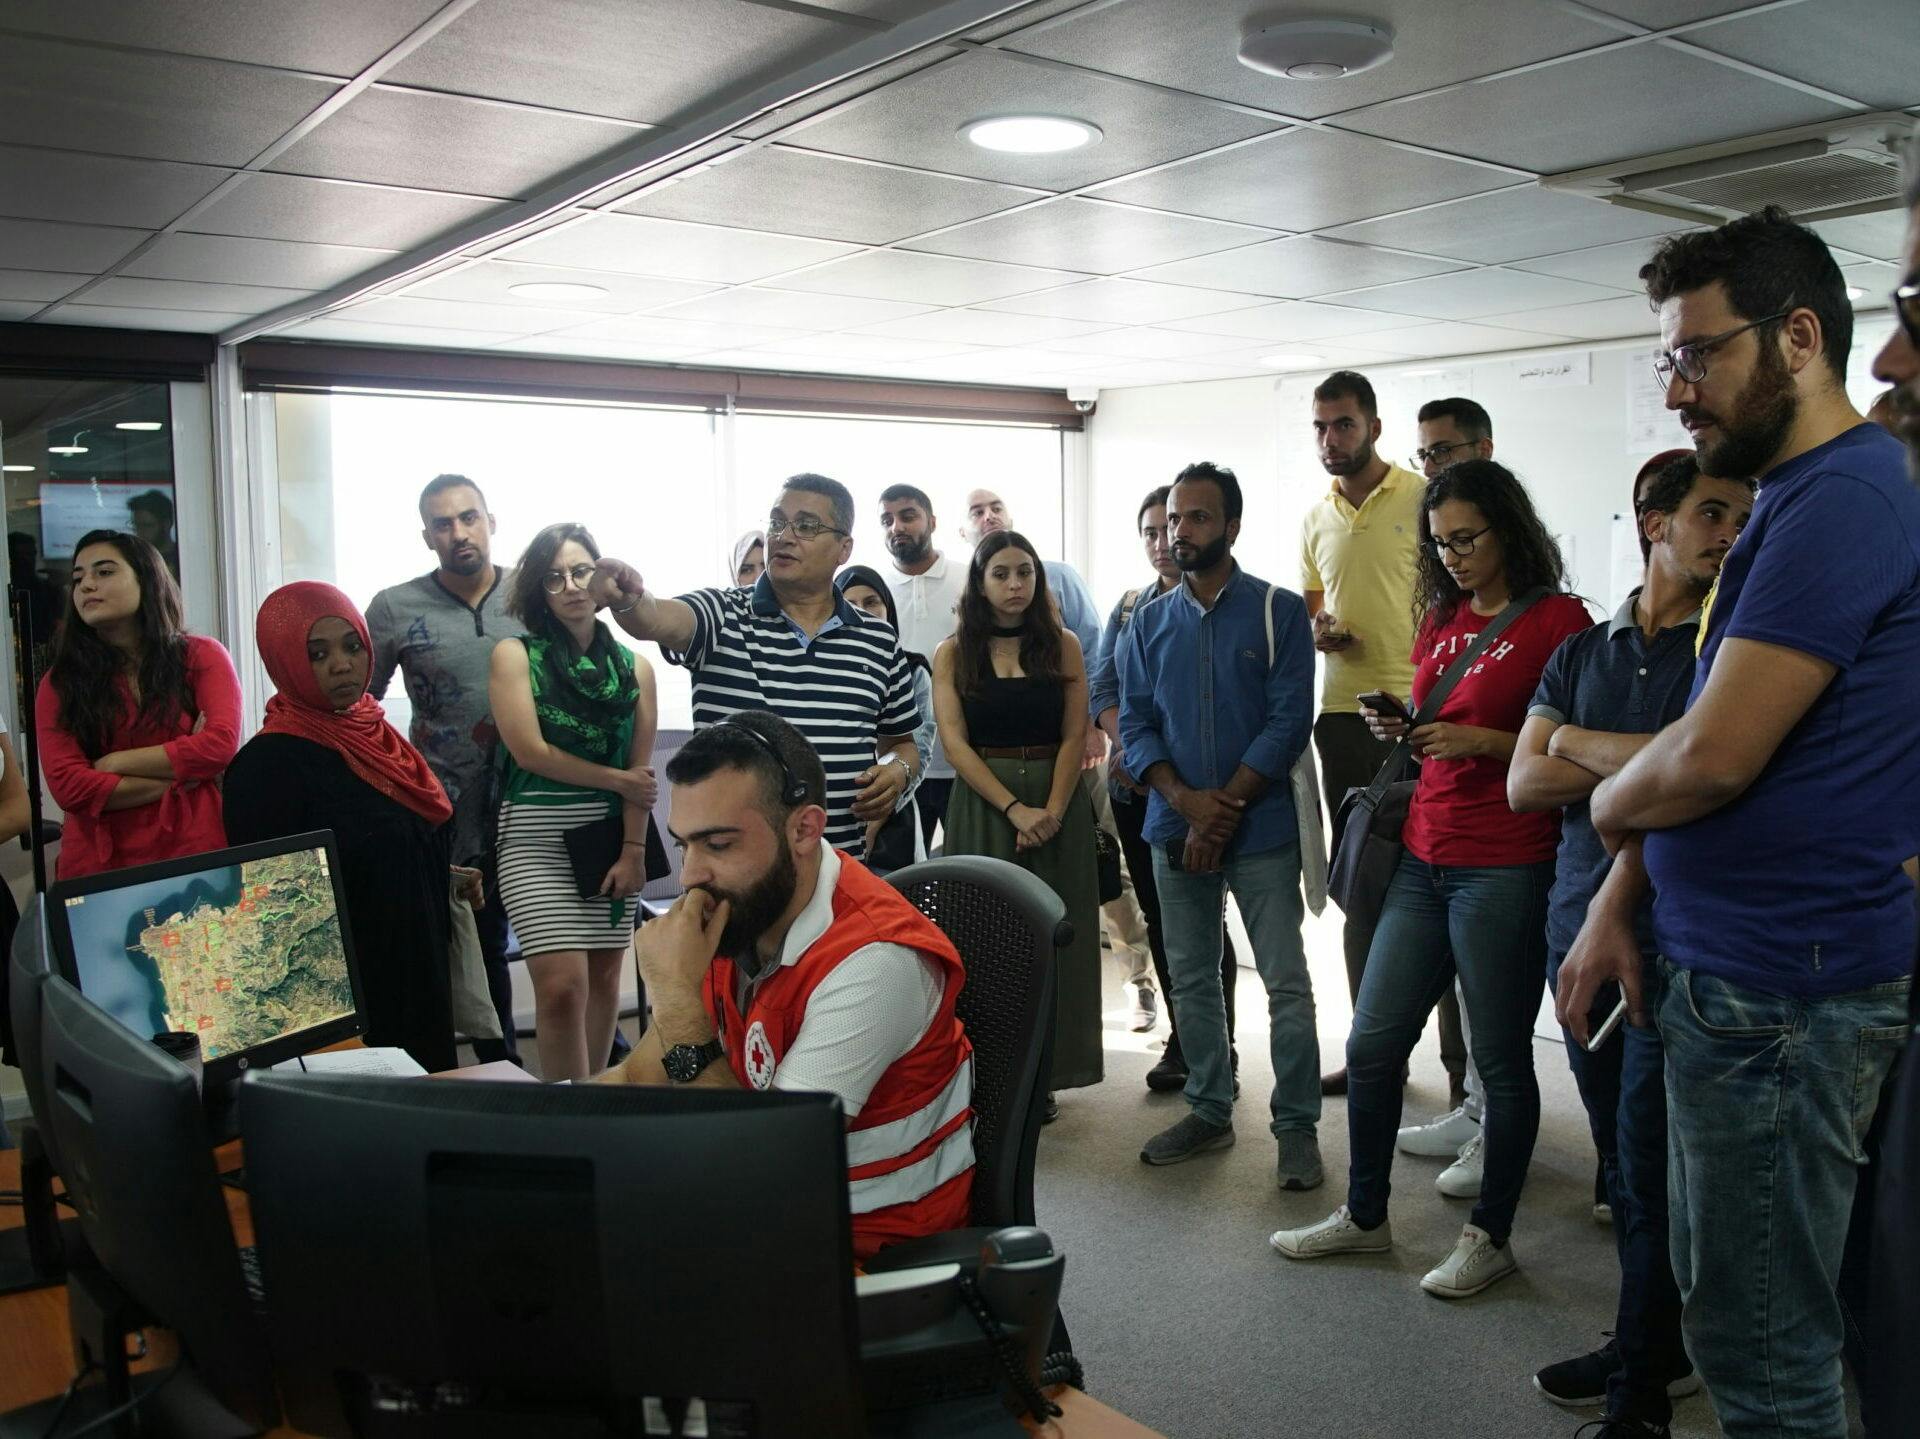 A group of people observing the work of an emergency coordinator in front of many computer screens.